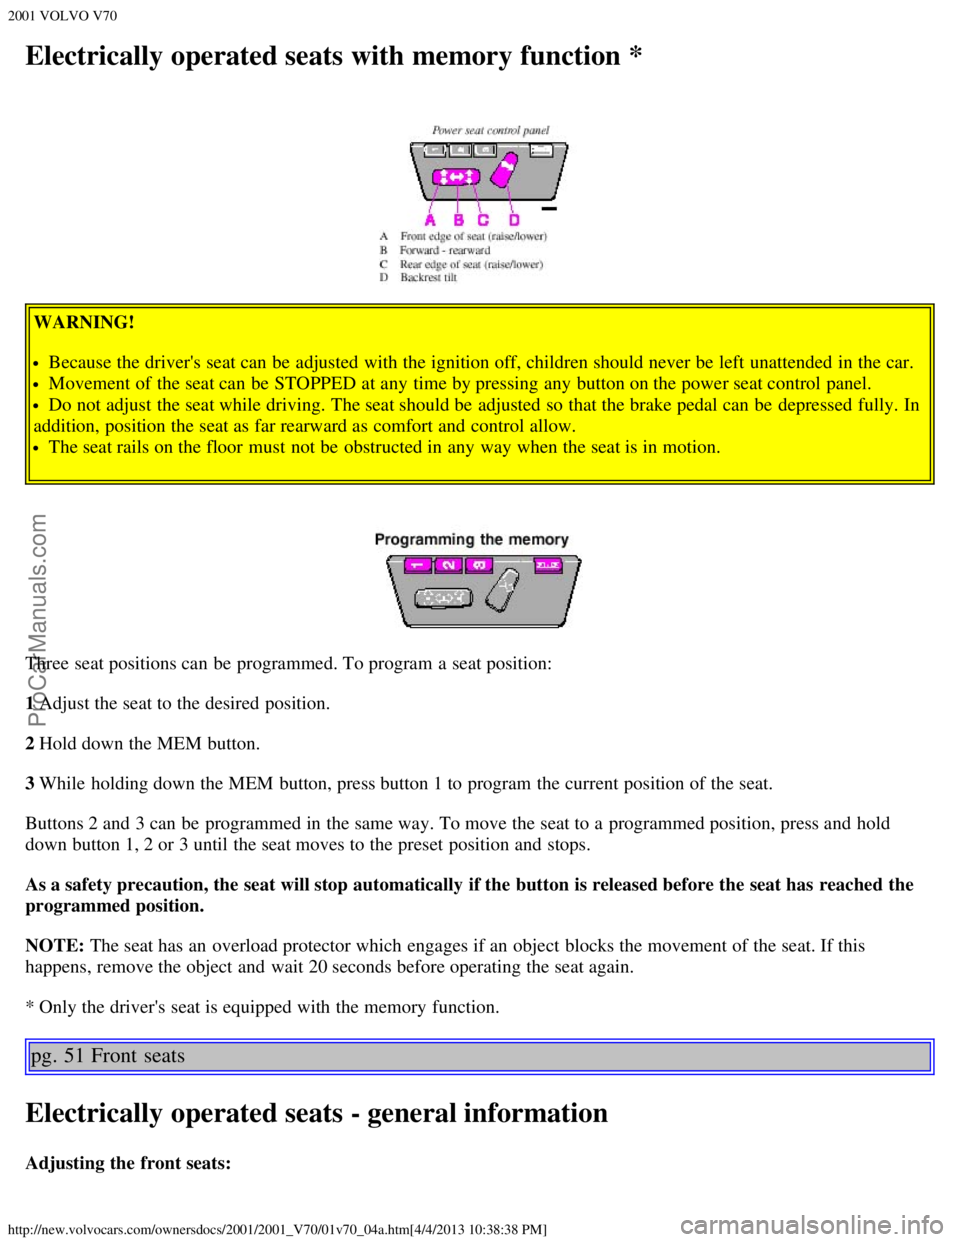 VOLVO V70 2001  Owners Manual 2001 VOLVO V70
http://new.volvocars.com/ownersdocs/2001/2001_V70/01v70_04a.htm[4/4/2013 10:38:38 PM]
Electrically operated seats with memory function *
WARNING!
Because the drivers seat can be  adjus